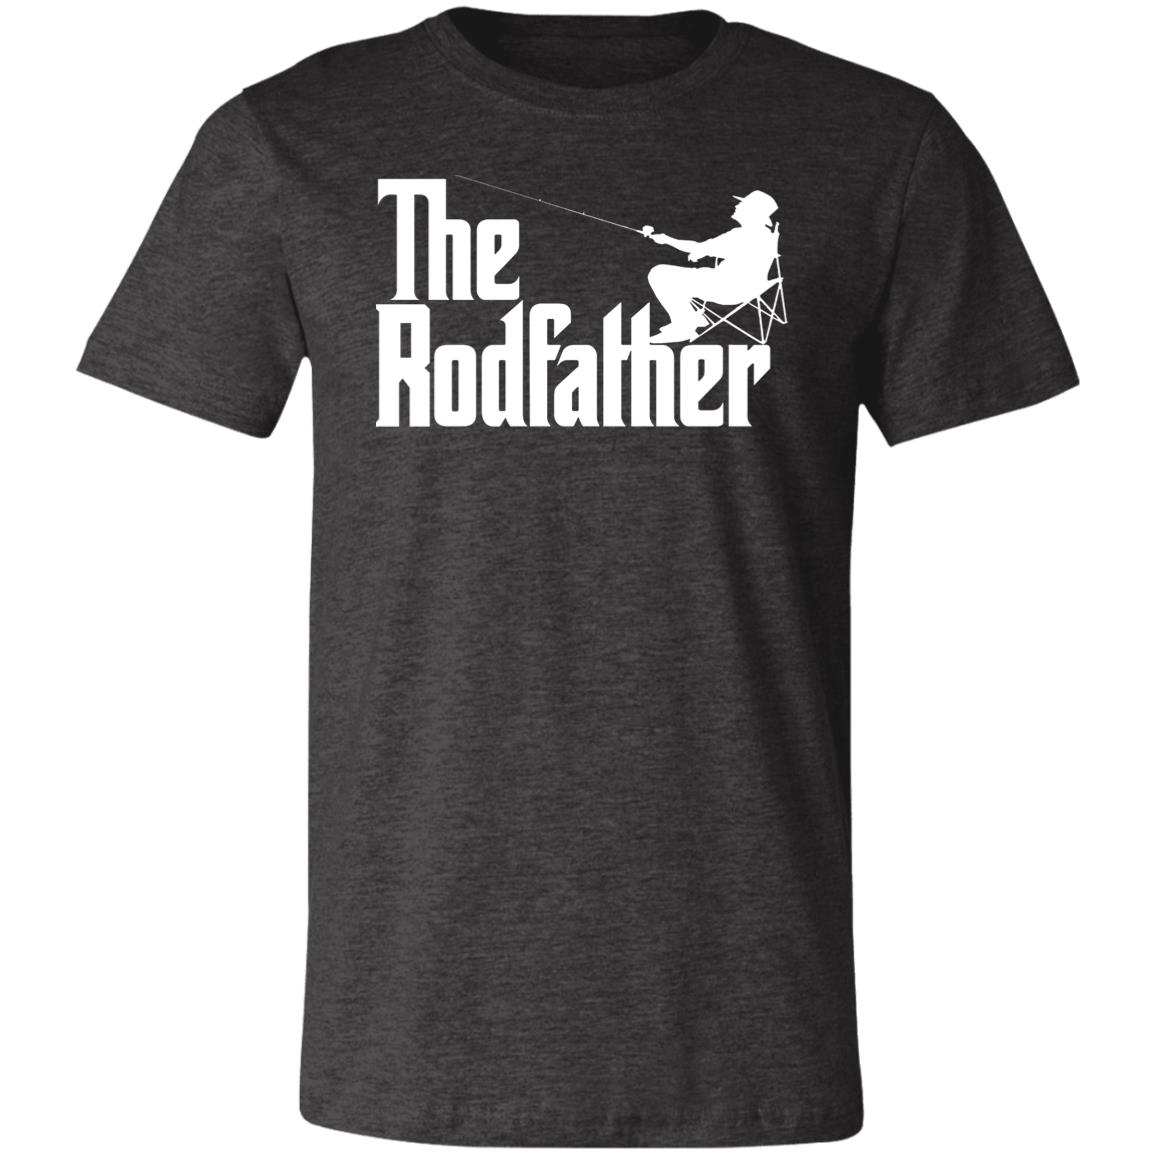 The Rodfather T-shirt Funny Fishing t shirt Stock Vector